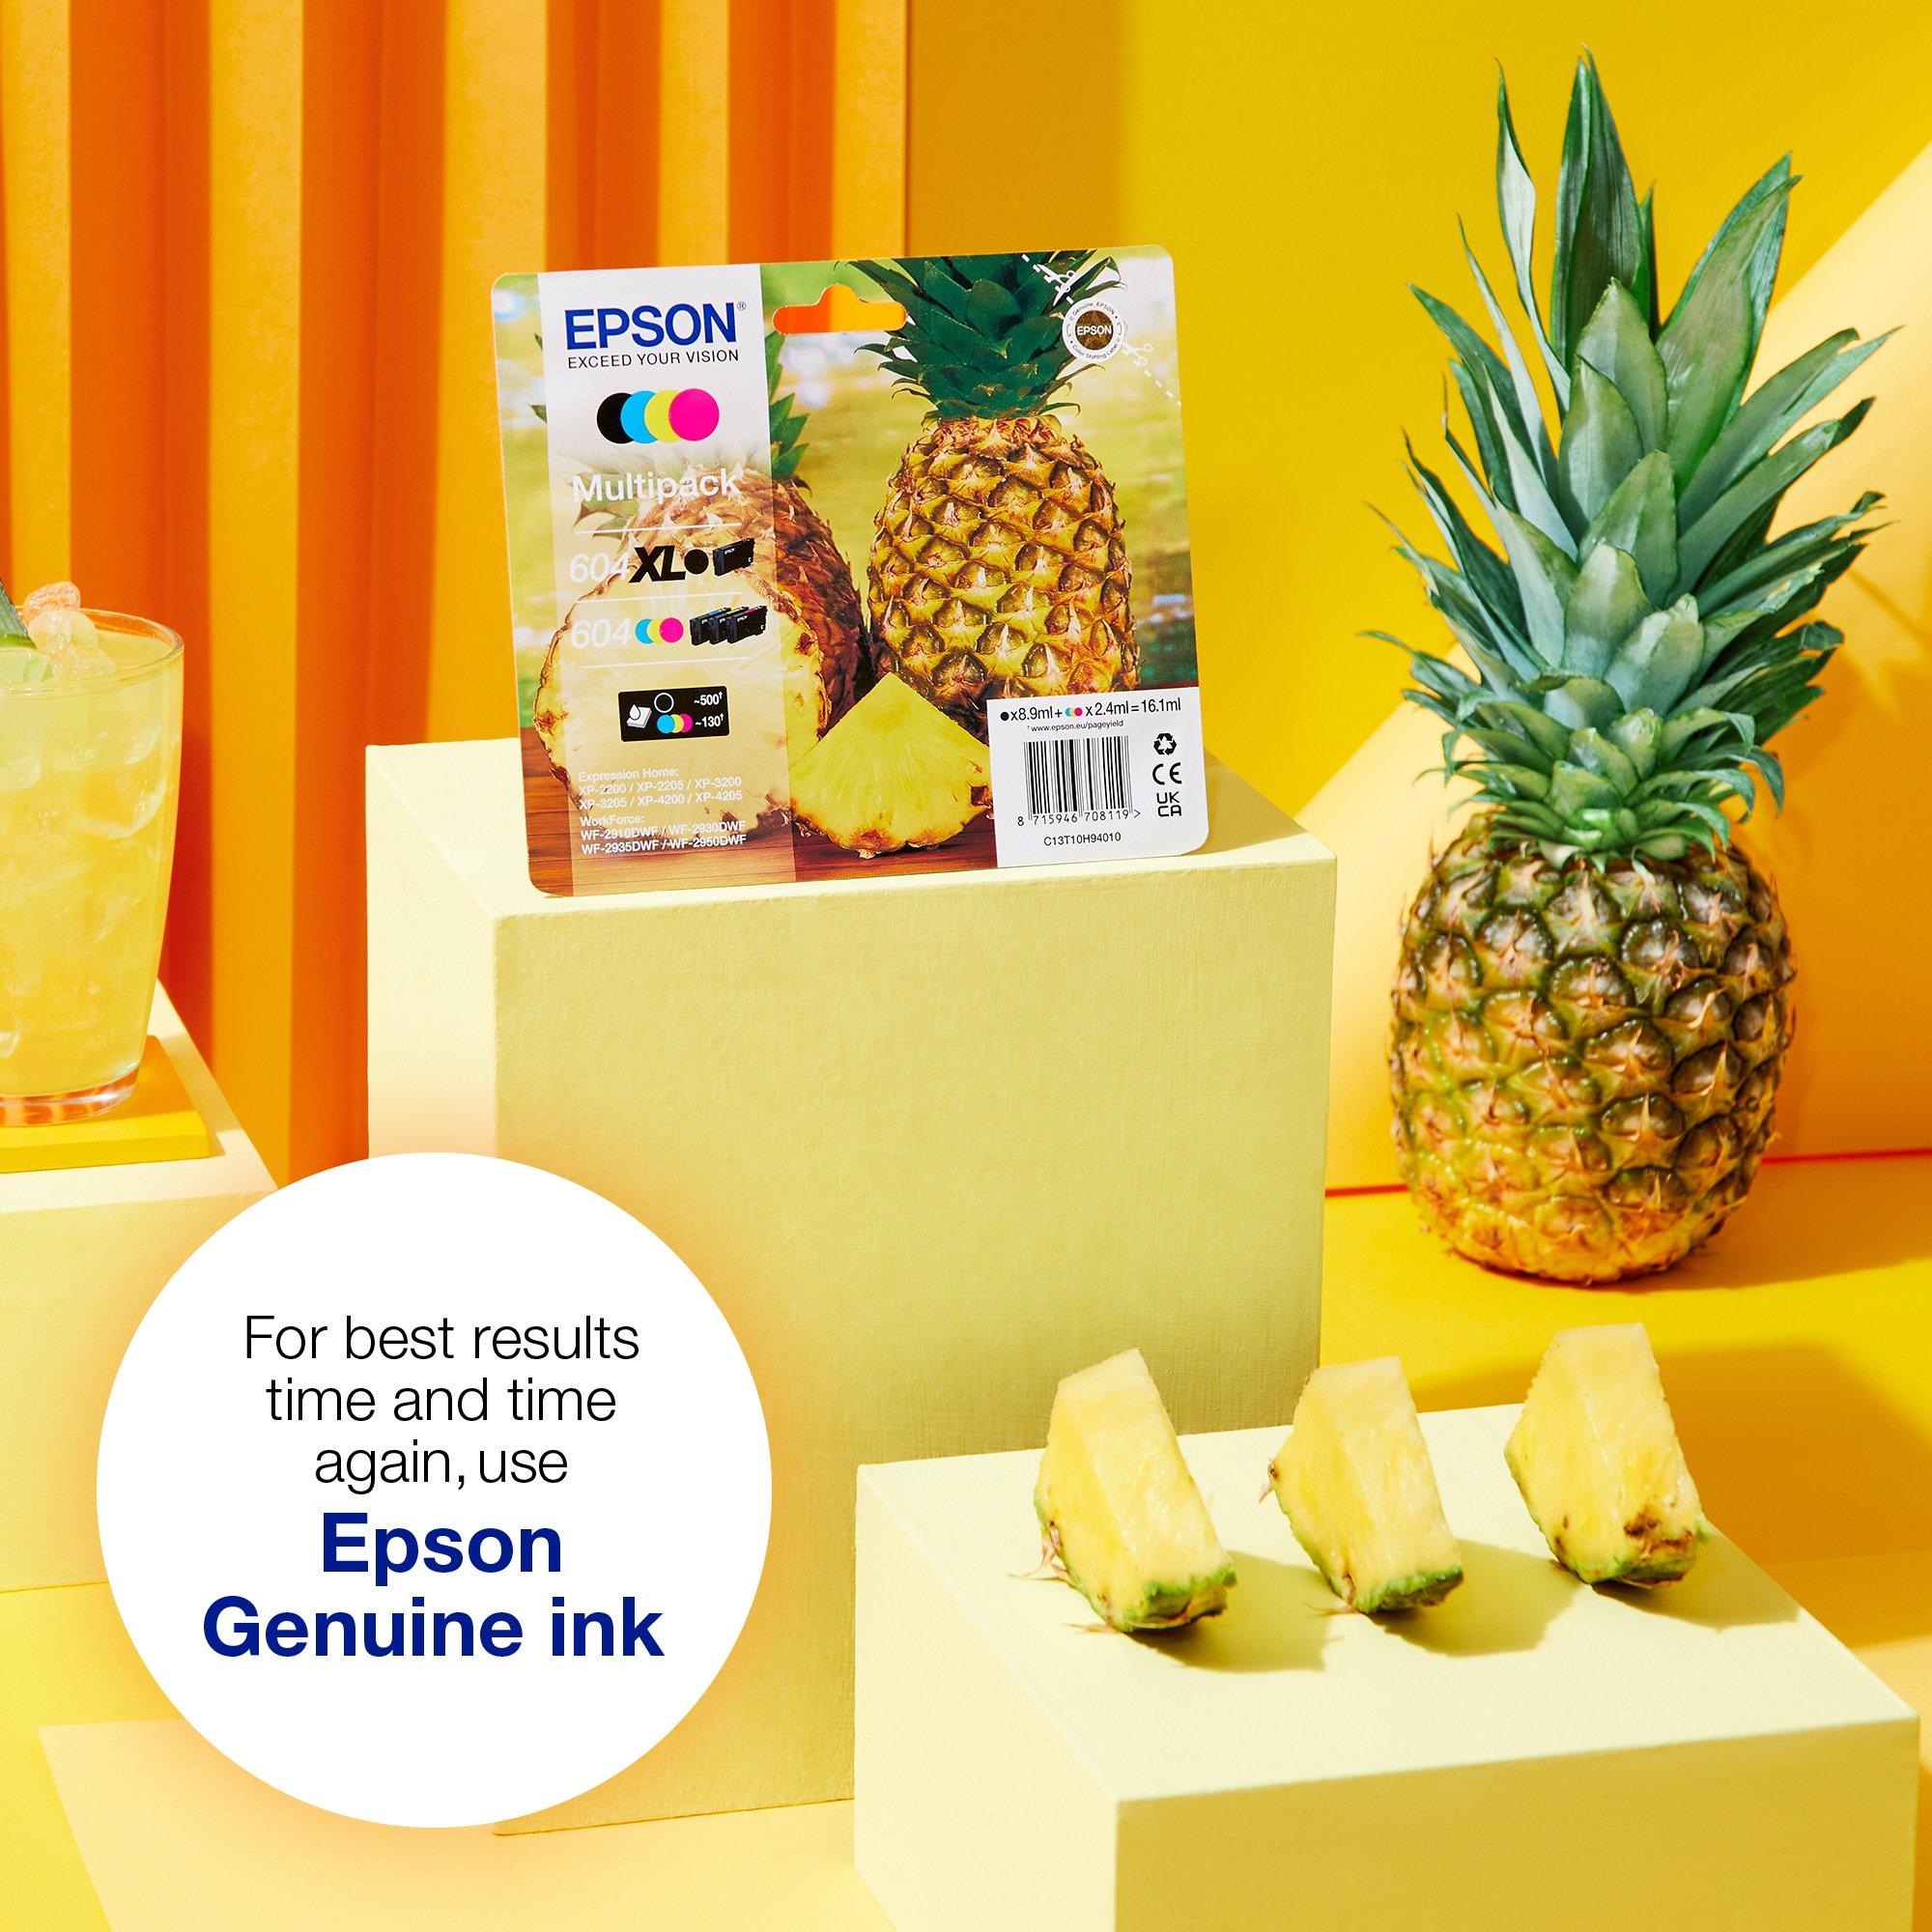 604XL Pineapple Multipack 4-colours Ink, Ink Consumables, Ink & Paper, Products